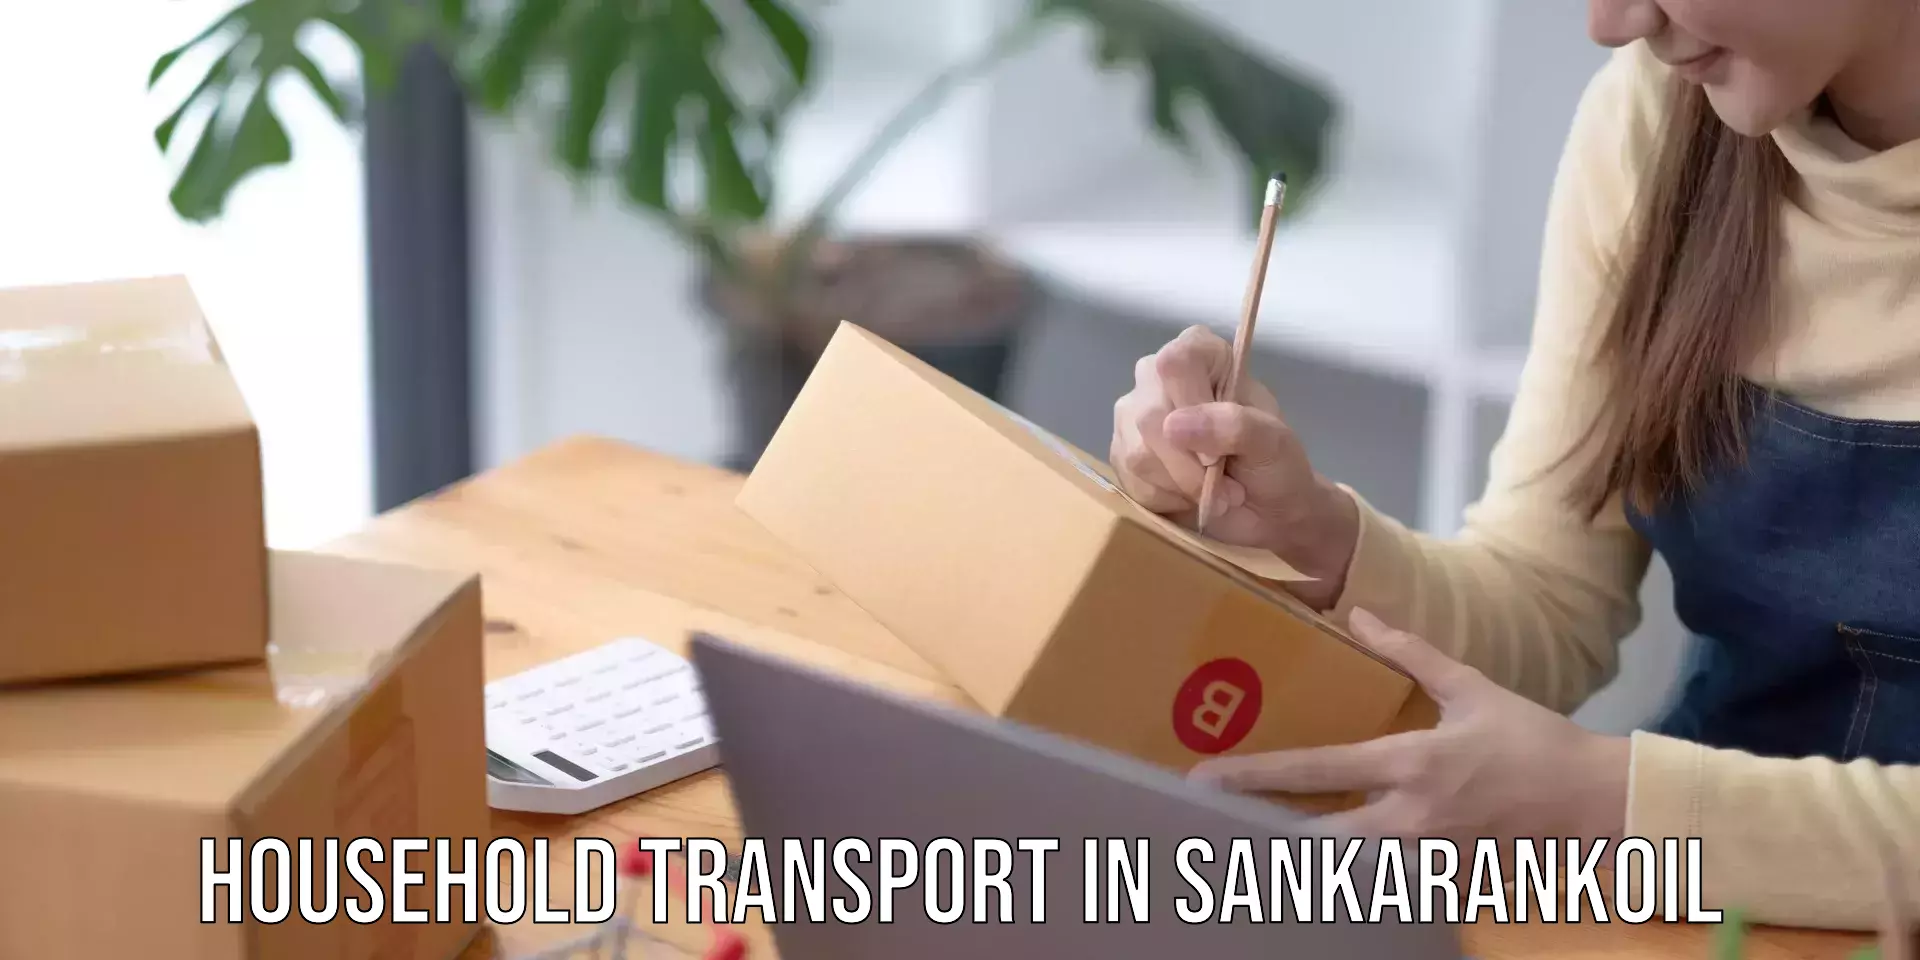 Professional movers and packers in Sankarankoil